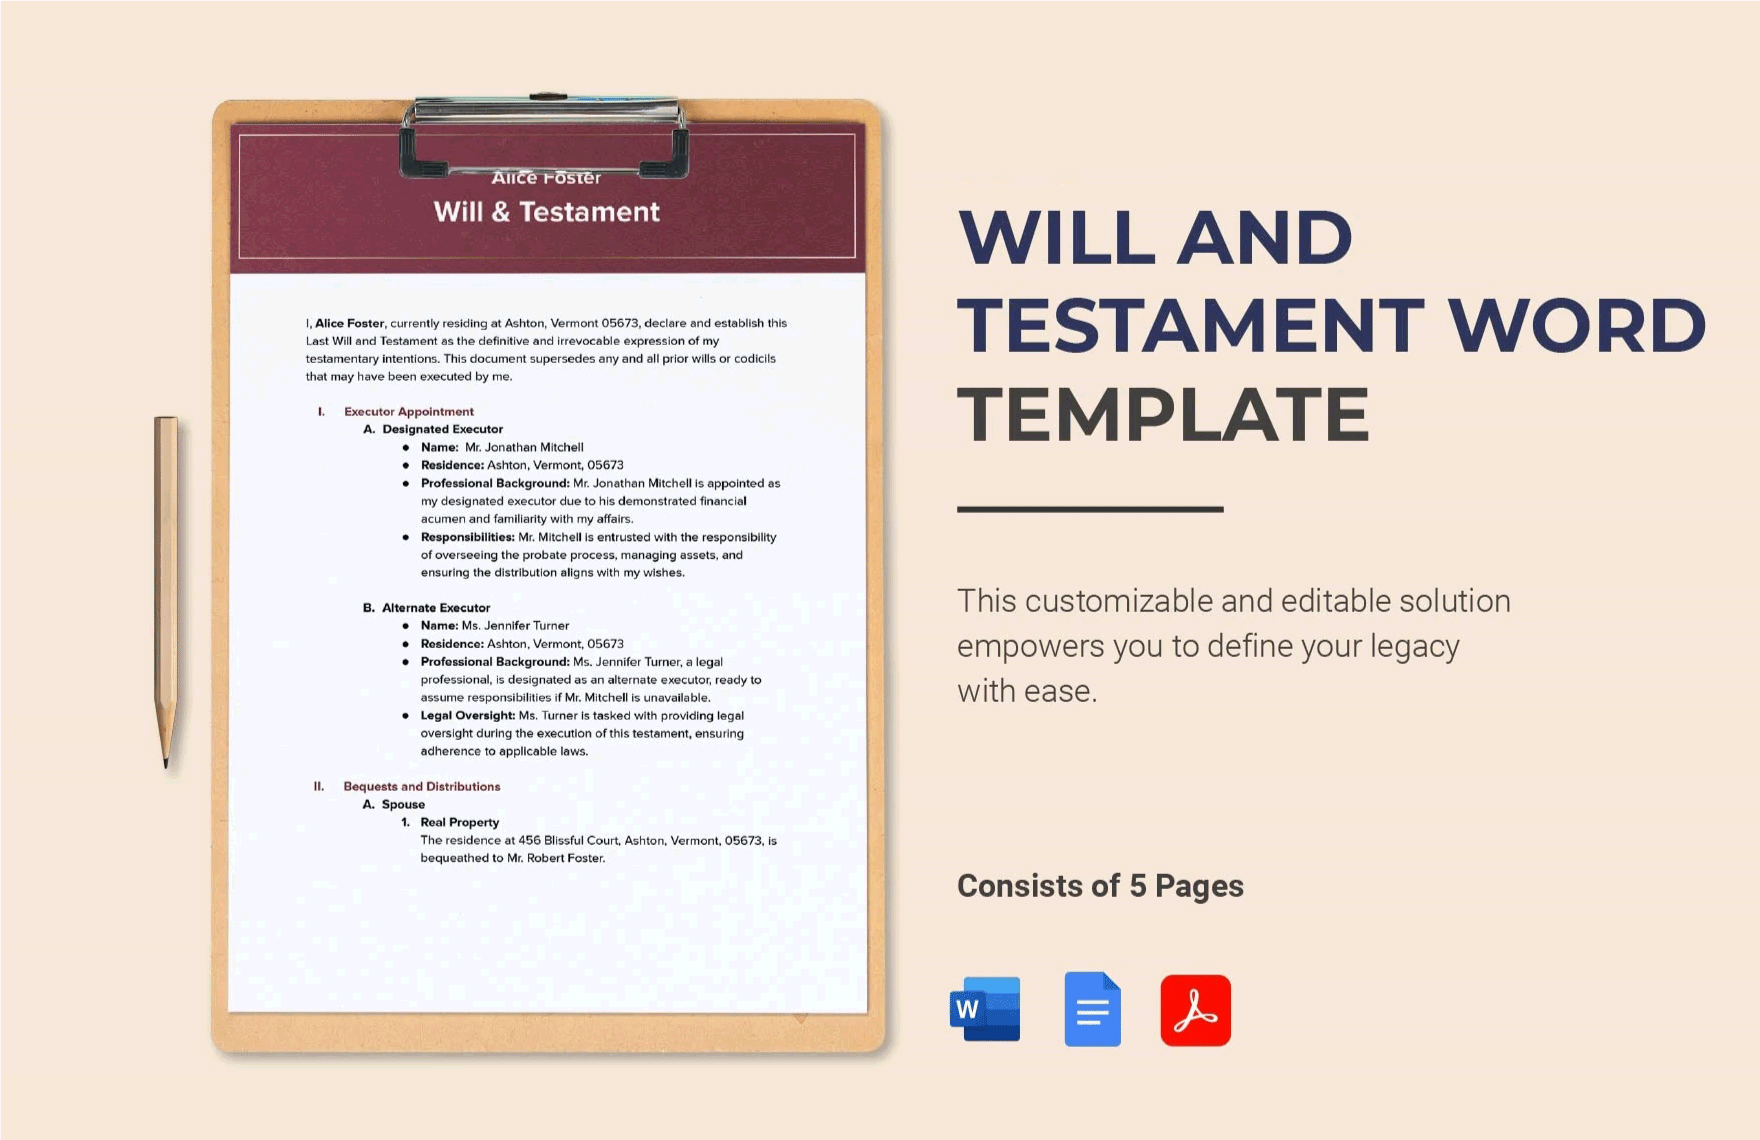 Will & Testament Word Template